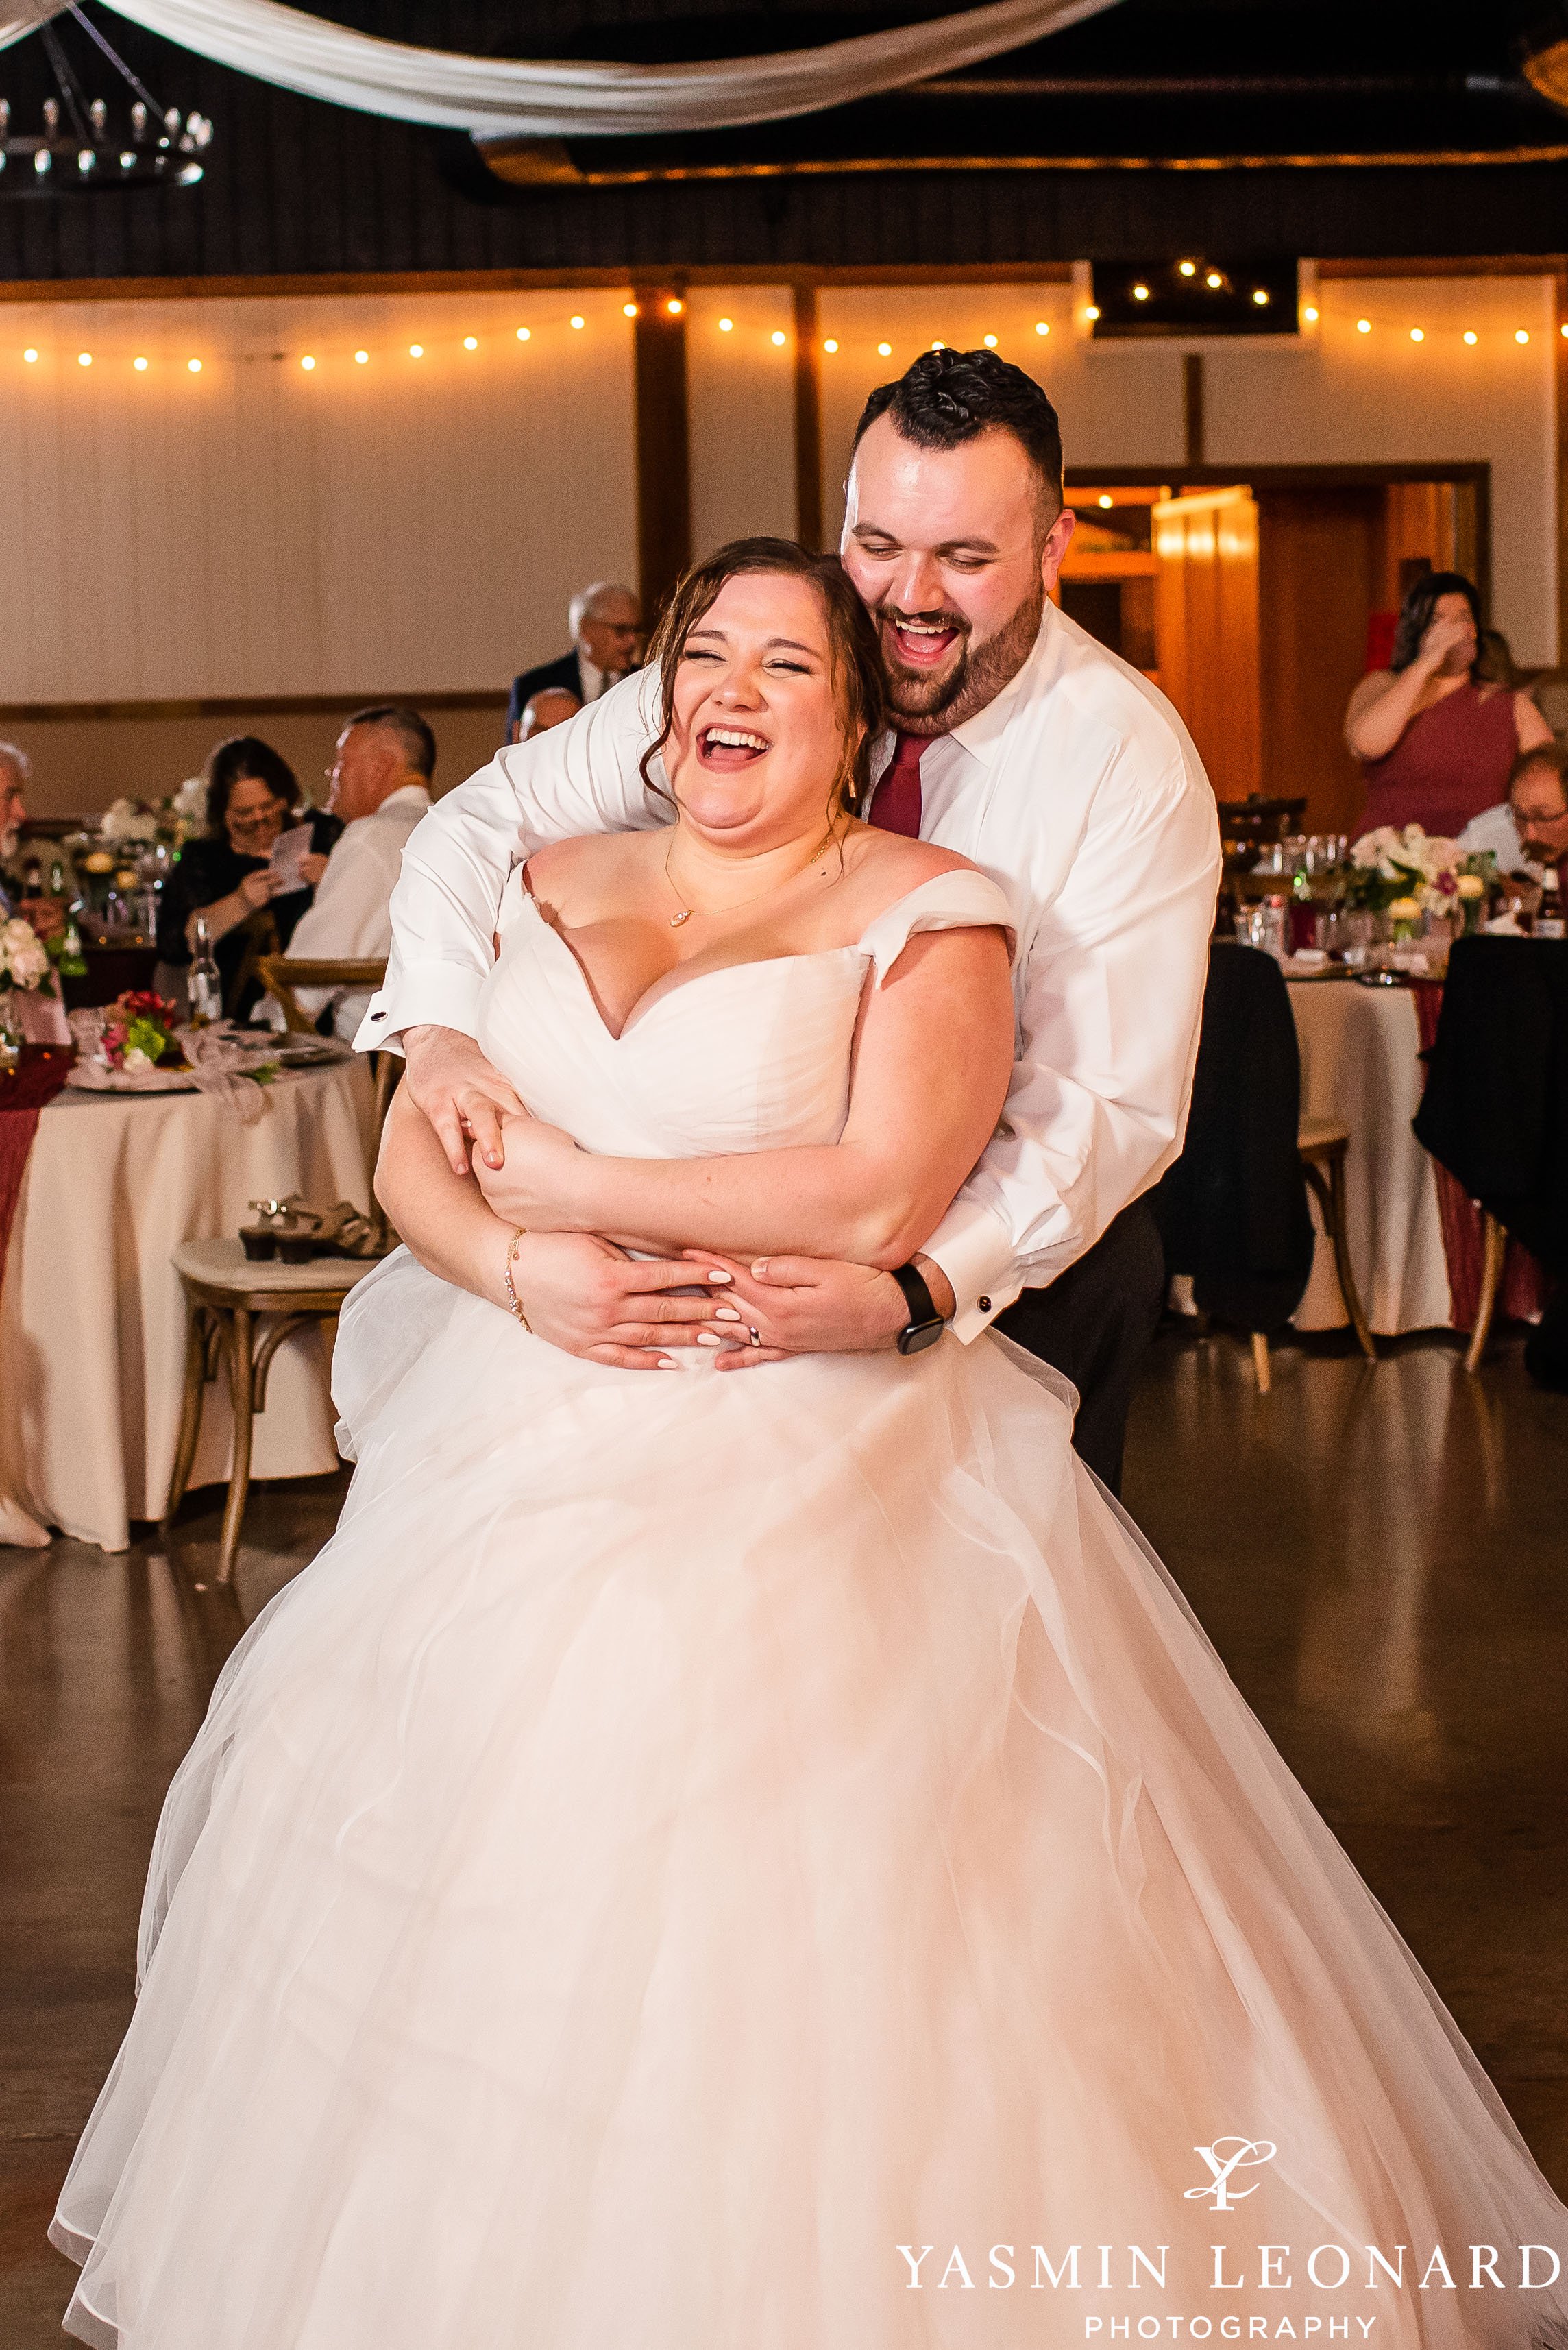 Legacy Stables and Events - Legacy Stables Wedding - Morgan and Logan - NC Weddings - Marry Me NC - Triad Weddings - Best Wedding Photographer Near Me - Best Photographer in High Point - Yasmin Leonard Photography-39.jpg